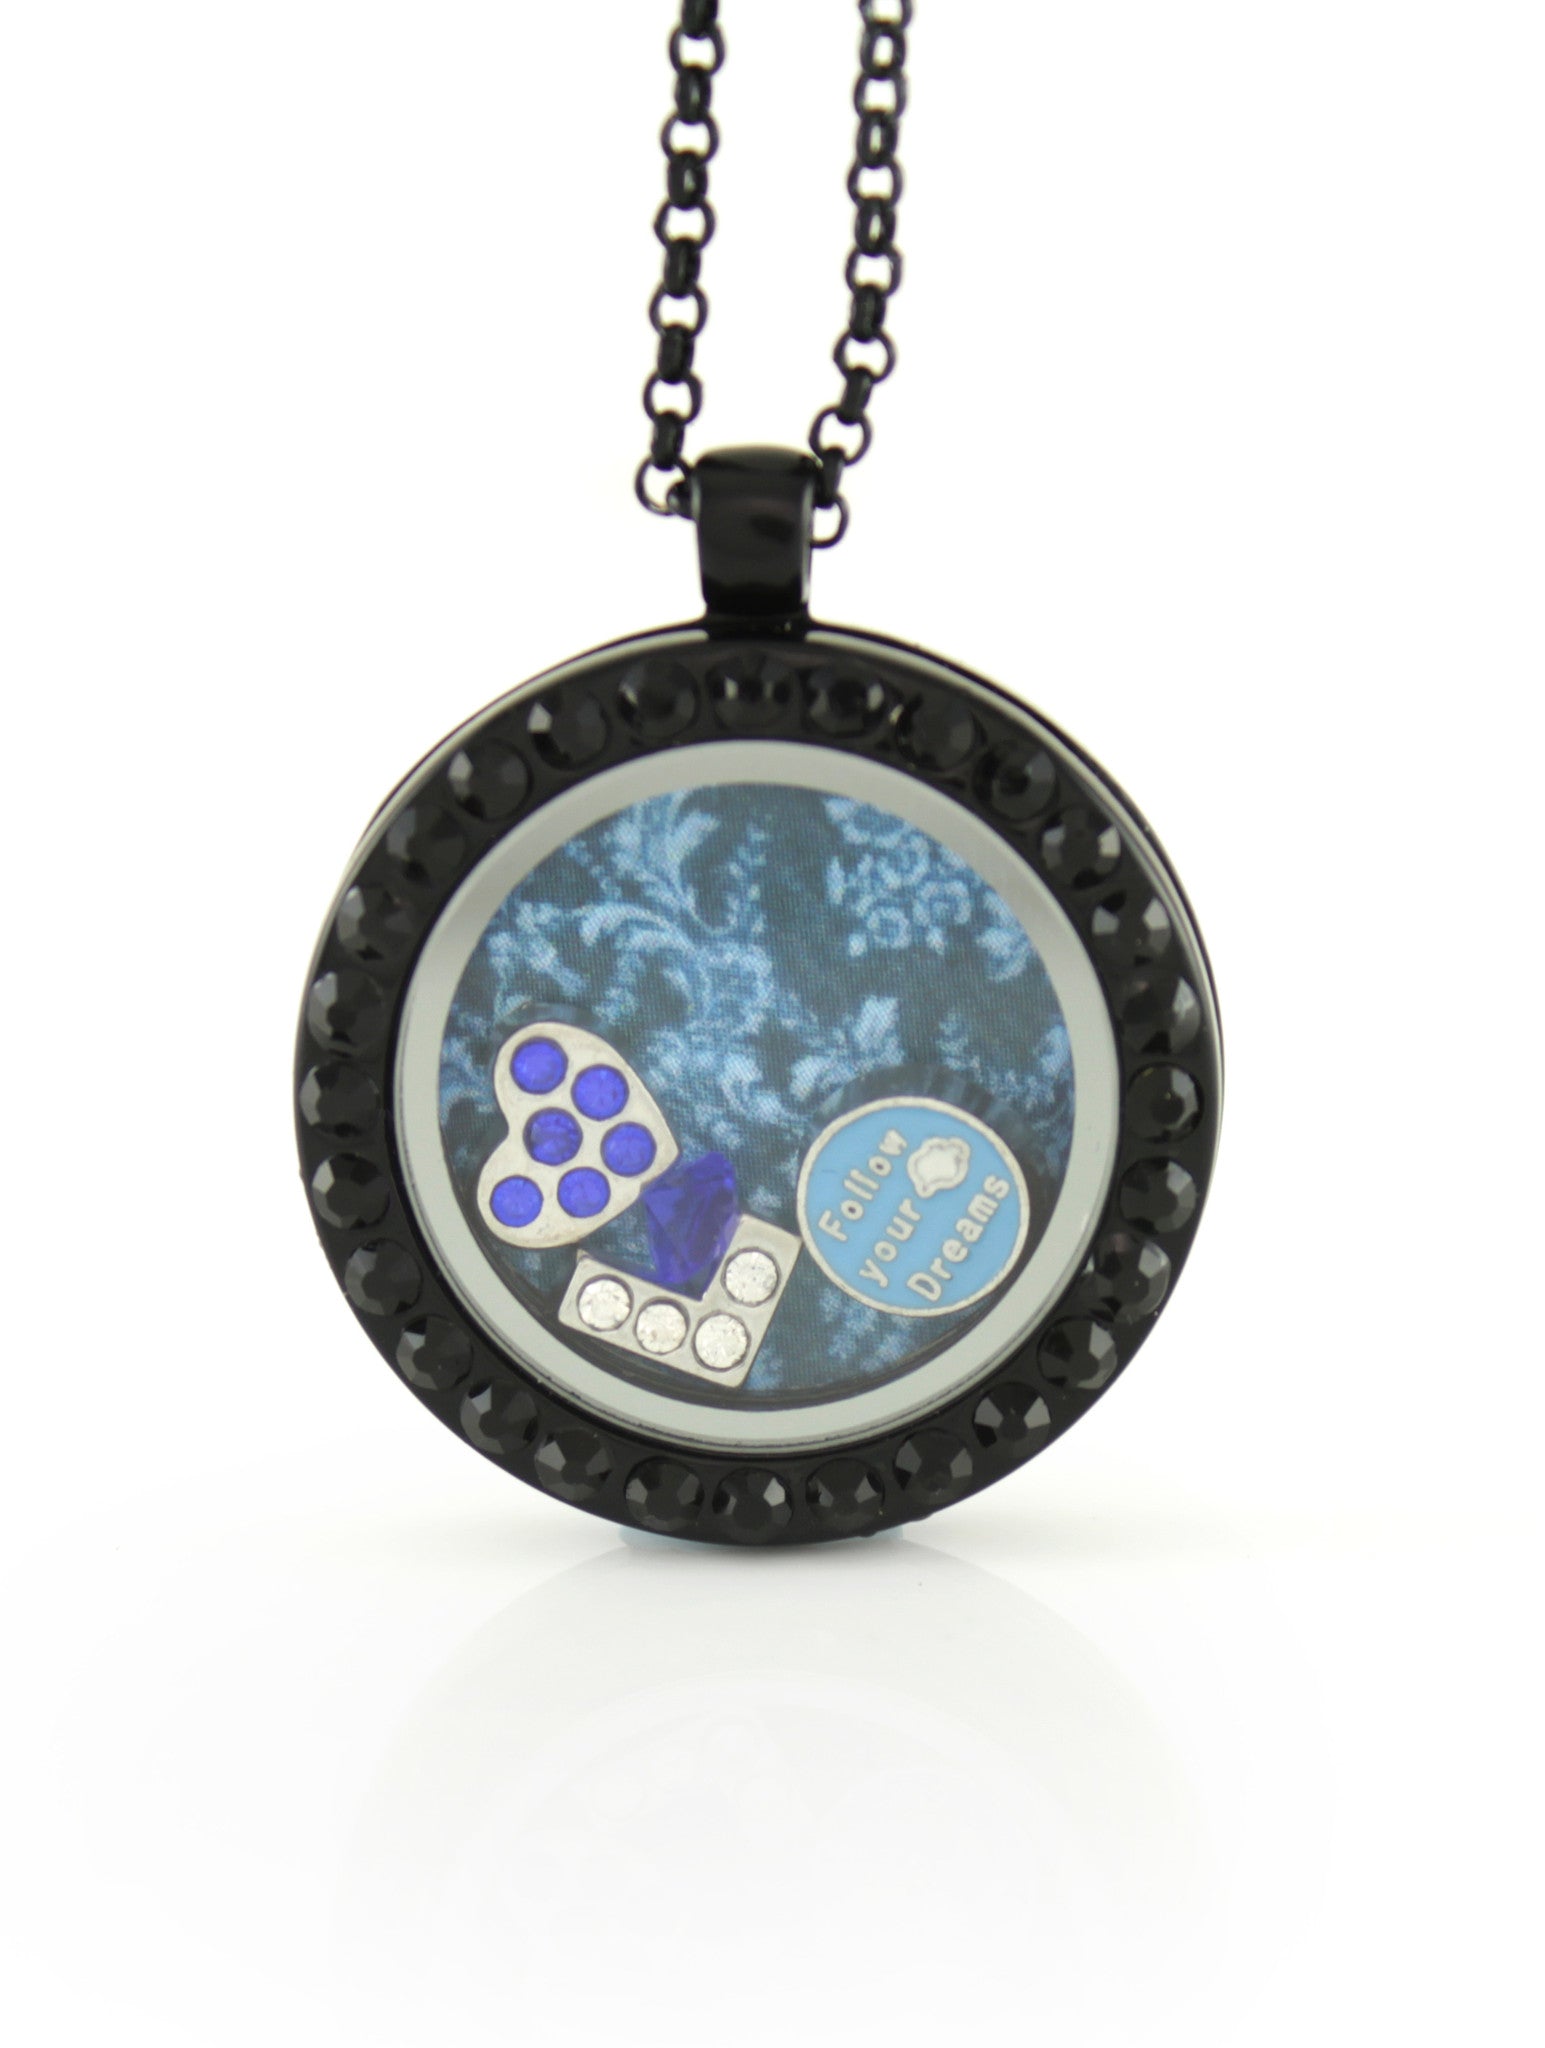 Floating Locket Necklace with 6 Mini Charms & Matching Chain (Gunmetal with Black Stone)